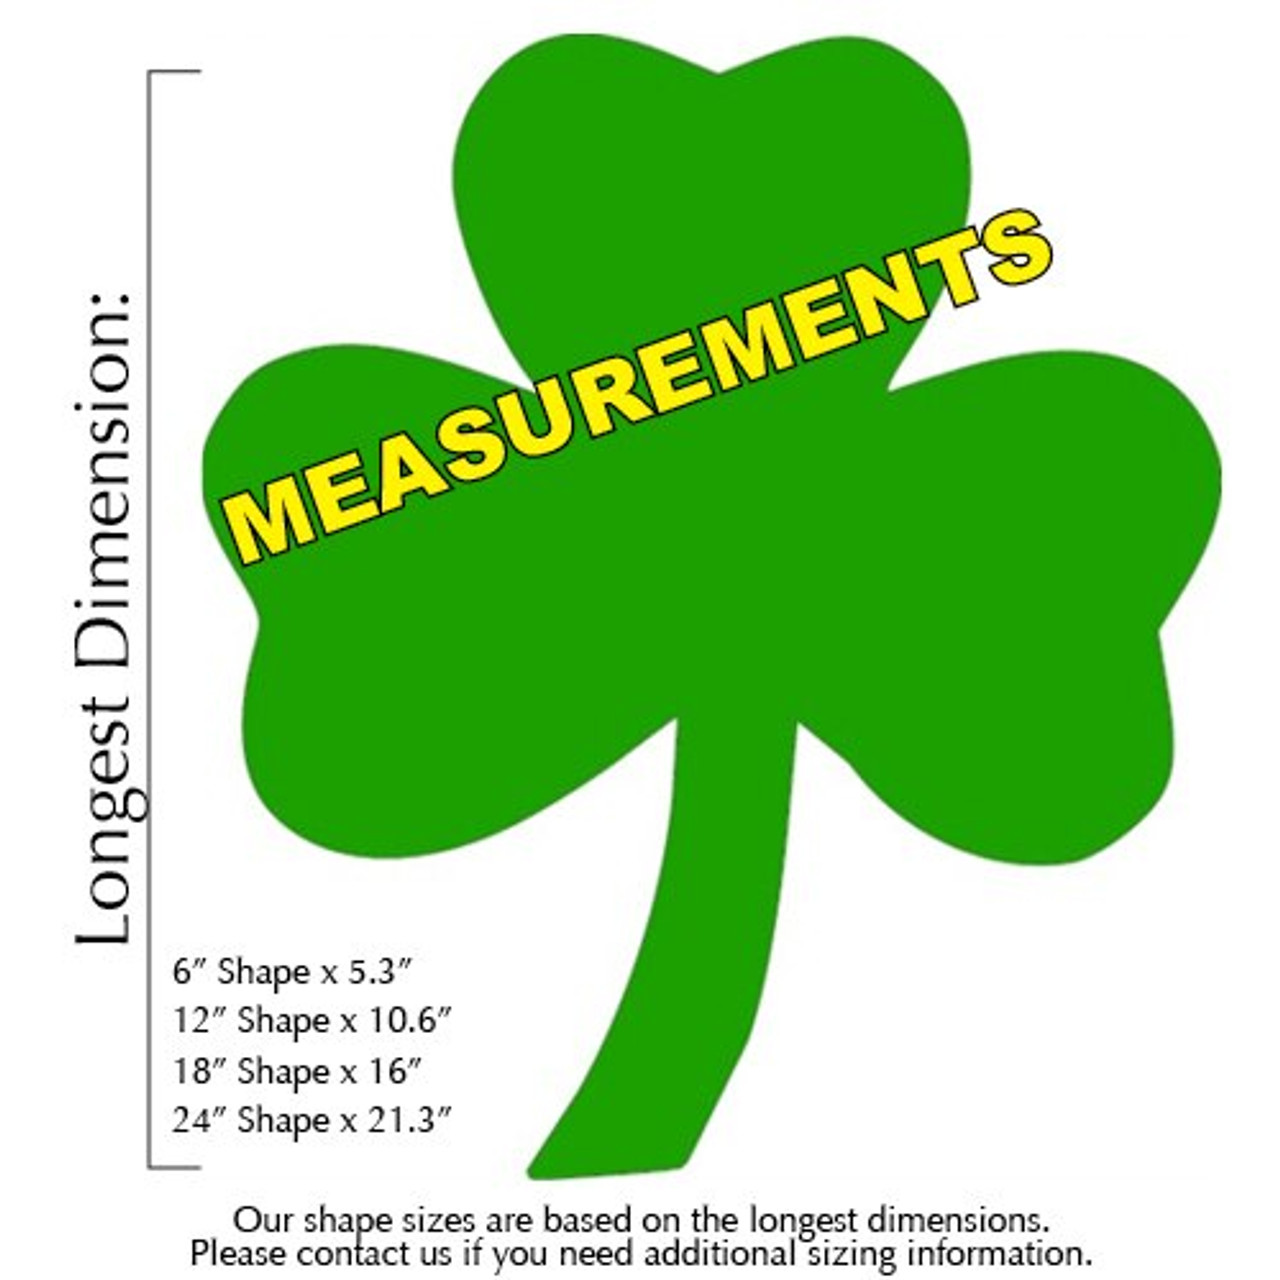 https://cdn11.bigcommerce.com/s-srux282/images/stencil/1280x1280/products/2211/42371/3_leaf_clover_Unfinished_CutoutB_MEASUREMENTS__28778.1612586463.jpg?c=2?imbypass=on